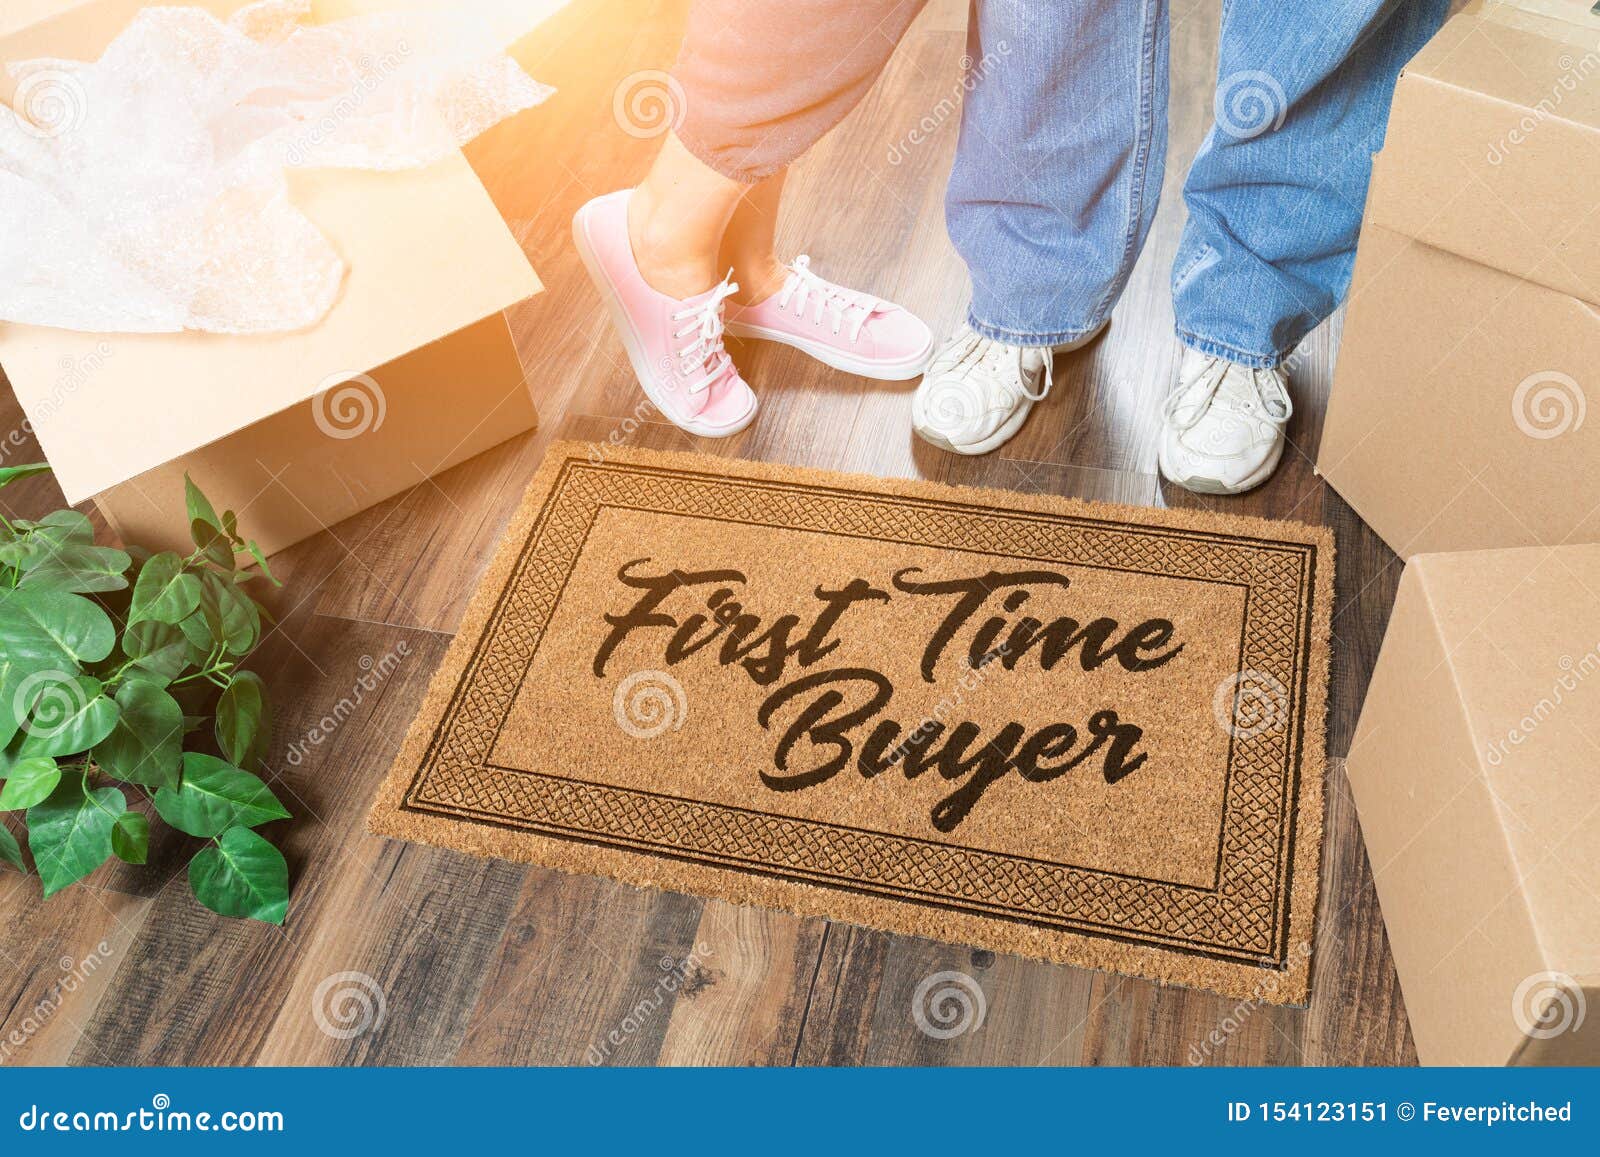 man and woman unpacking near our first time buyer welcome mat, moving boxes and plant